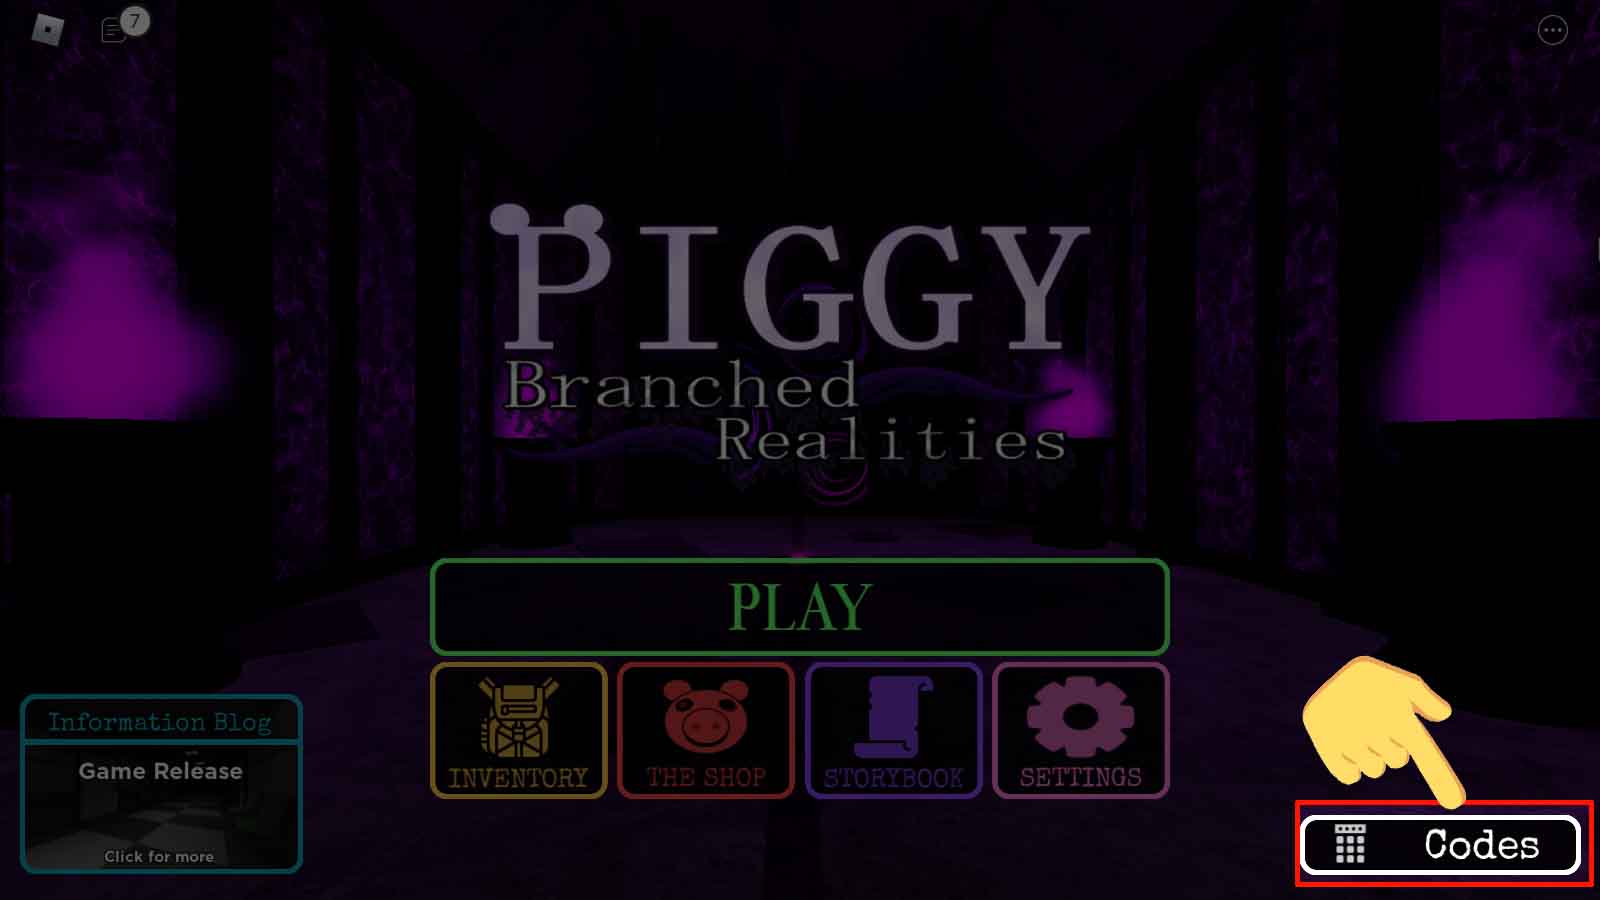 Piggy Branched Realities